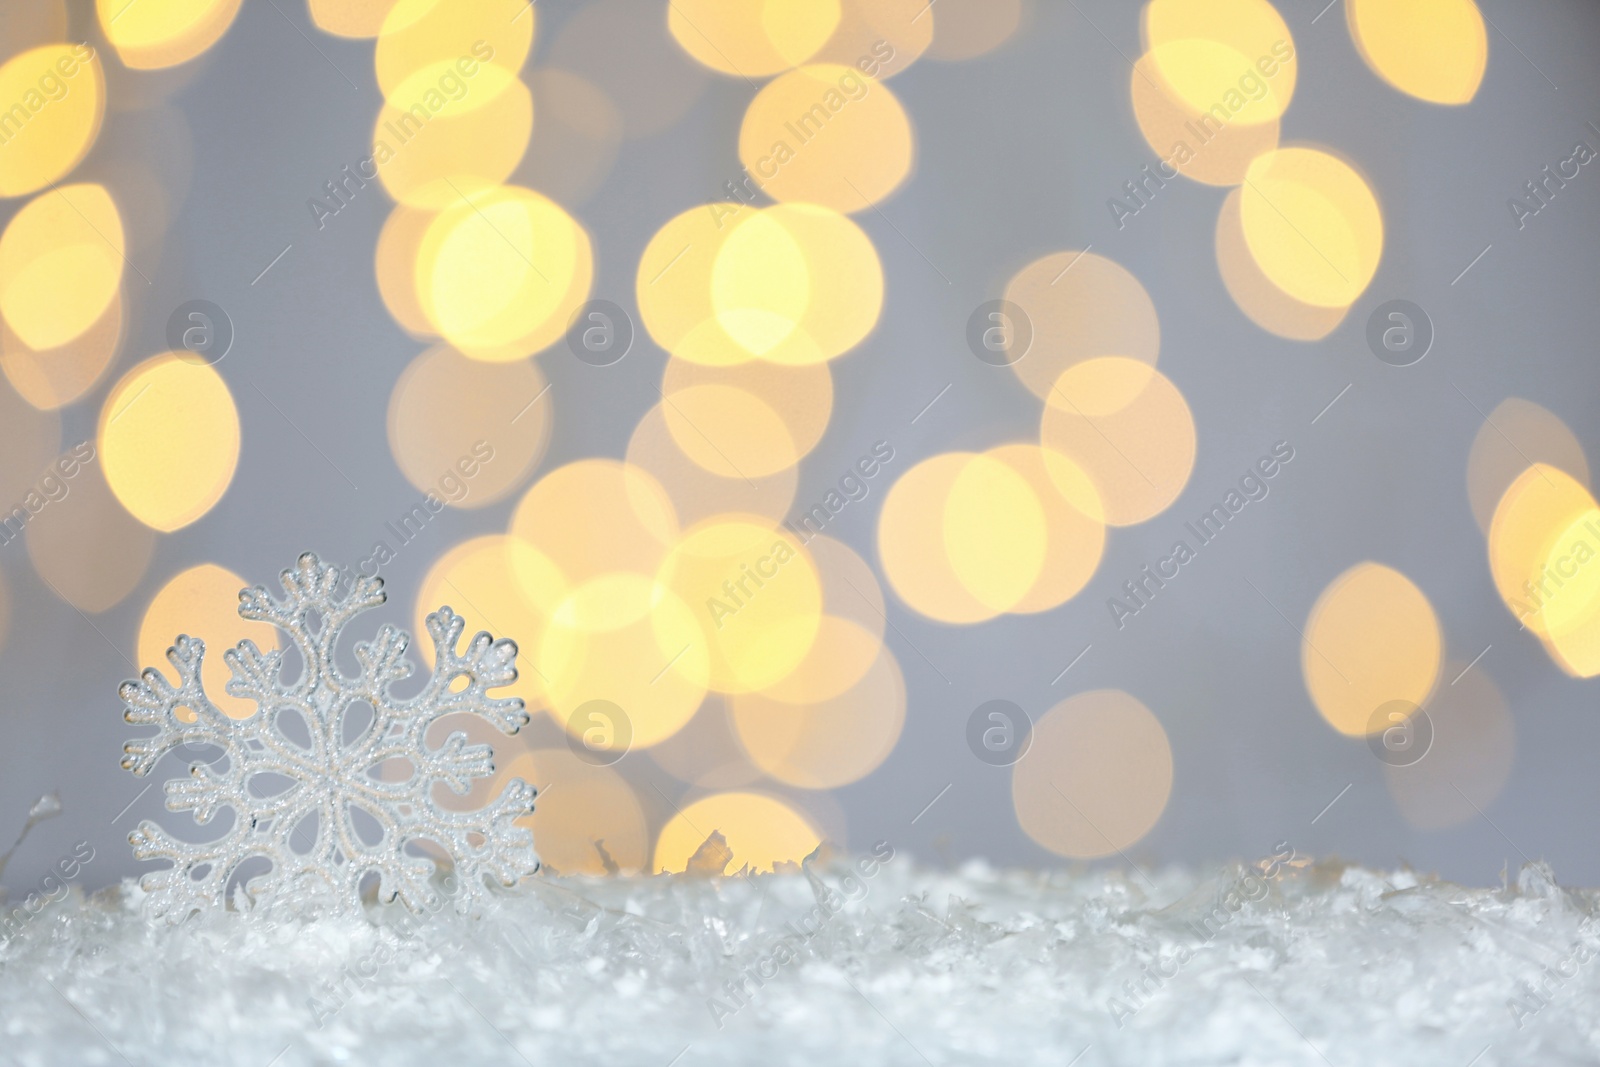 Photo of Beautiful decorative snowflake against blurred festive lights, space for text